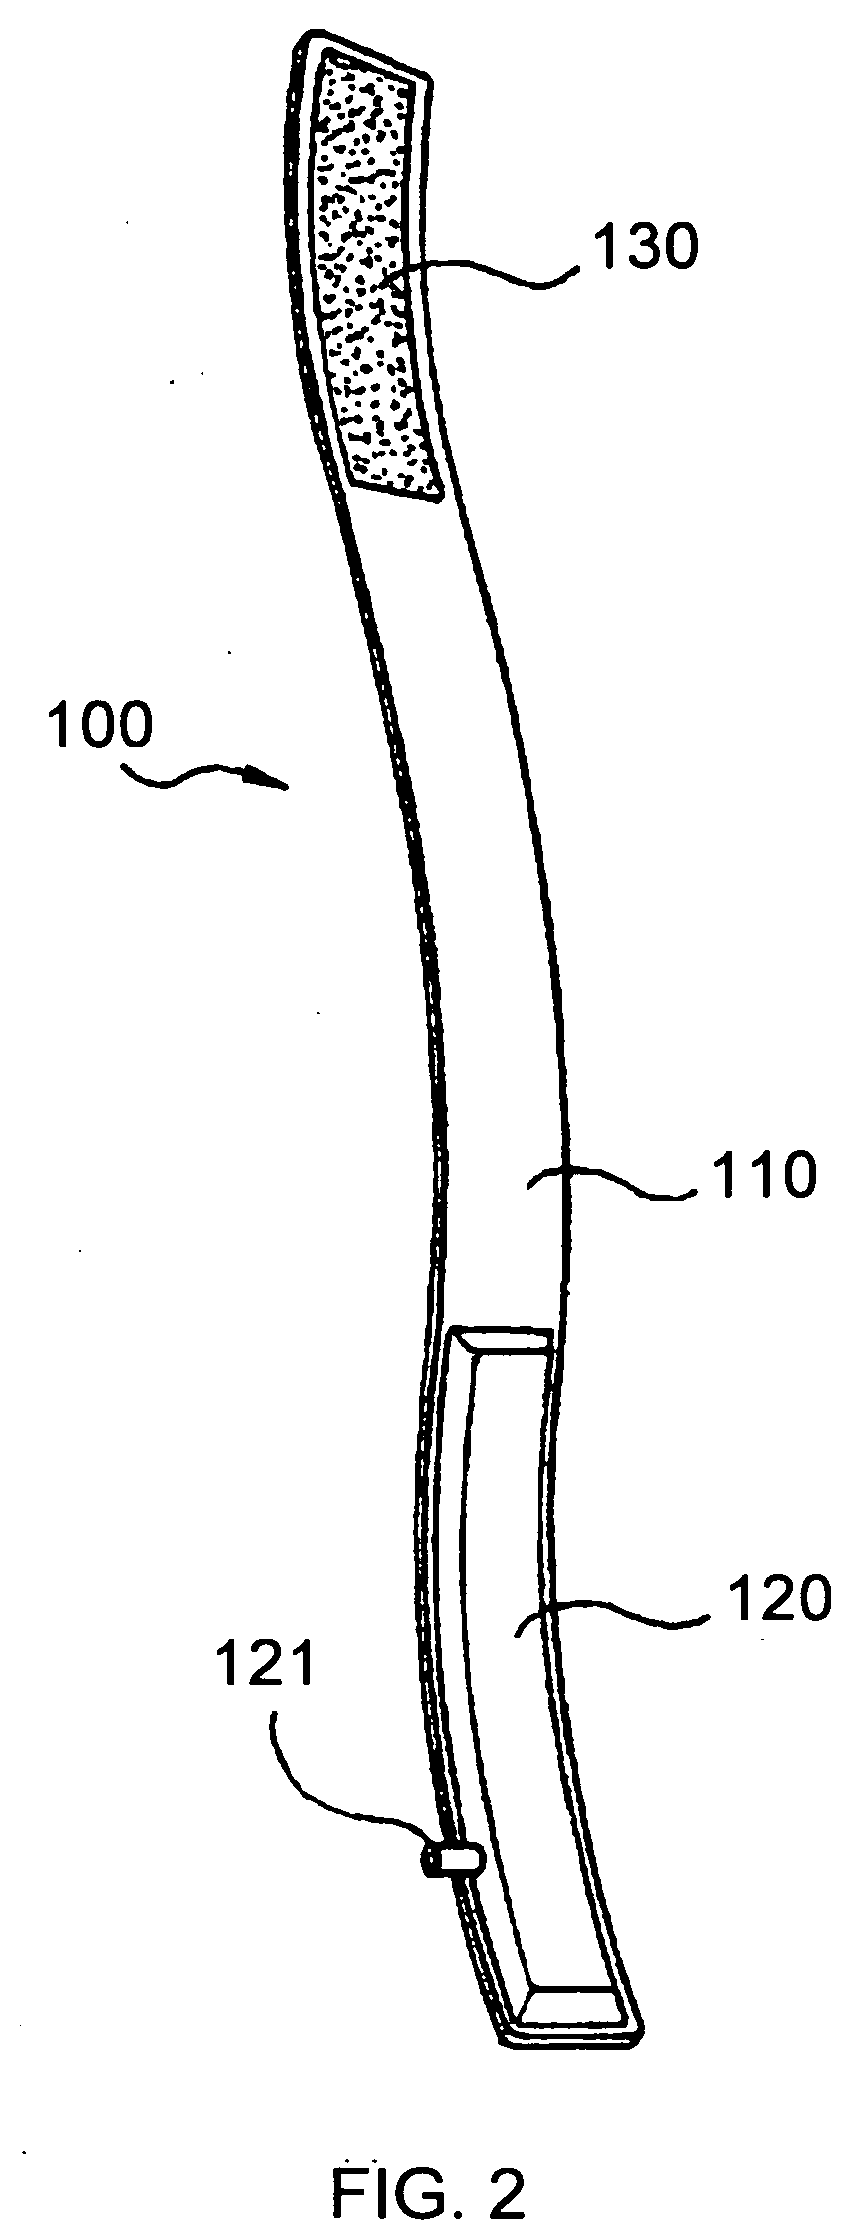 Pressure muscular strength enhancing system and controller, and method being carried out by controller